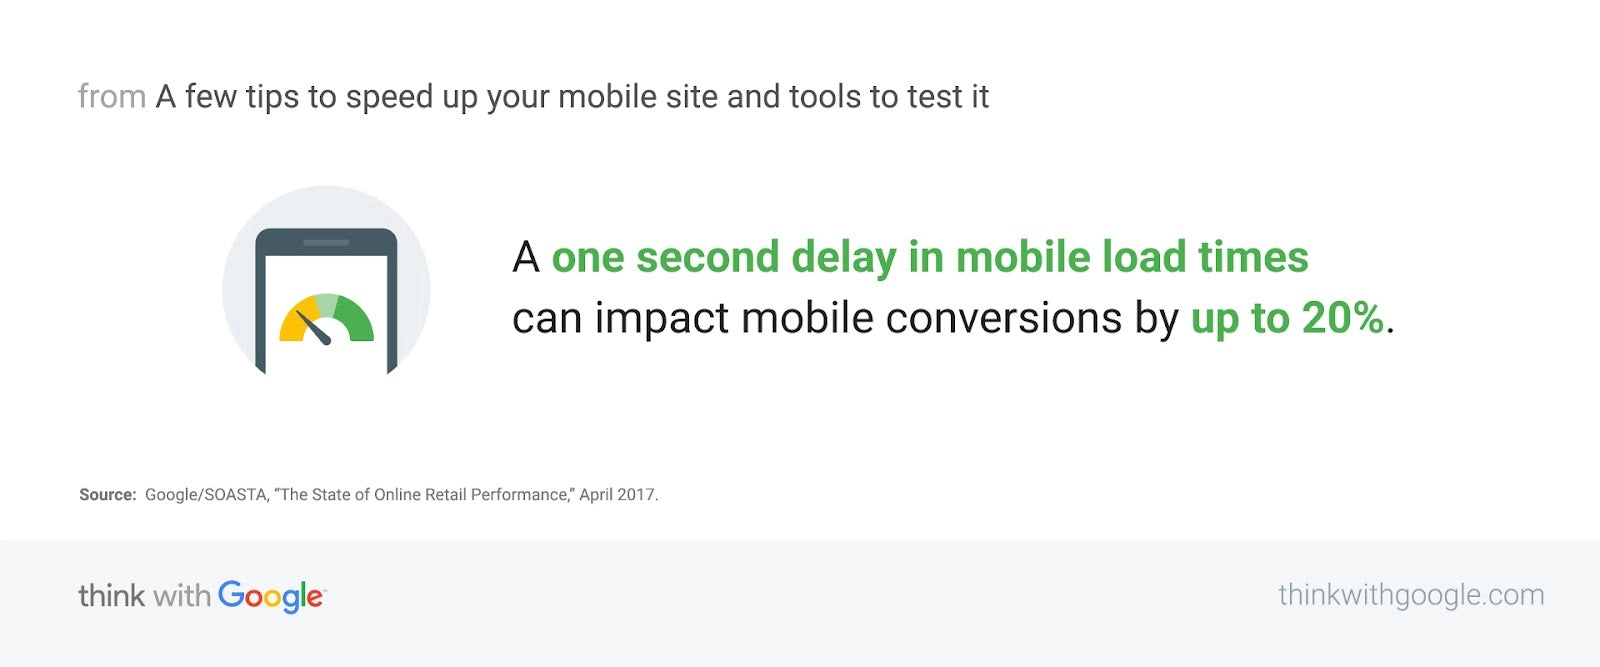 Statistic about mobile conversion from Think with Google